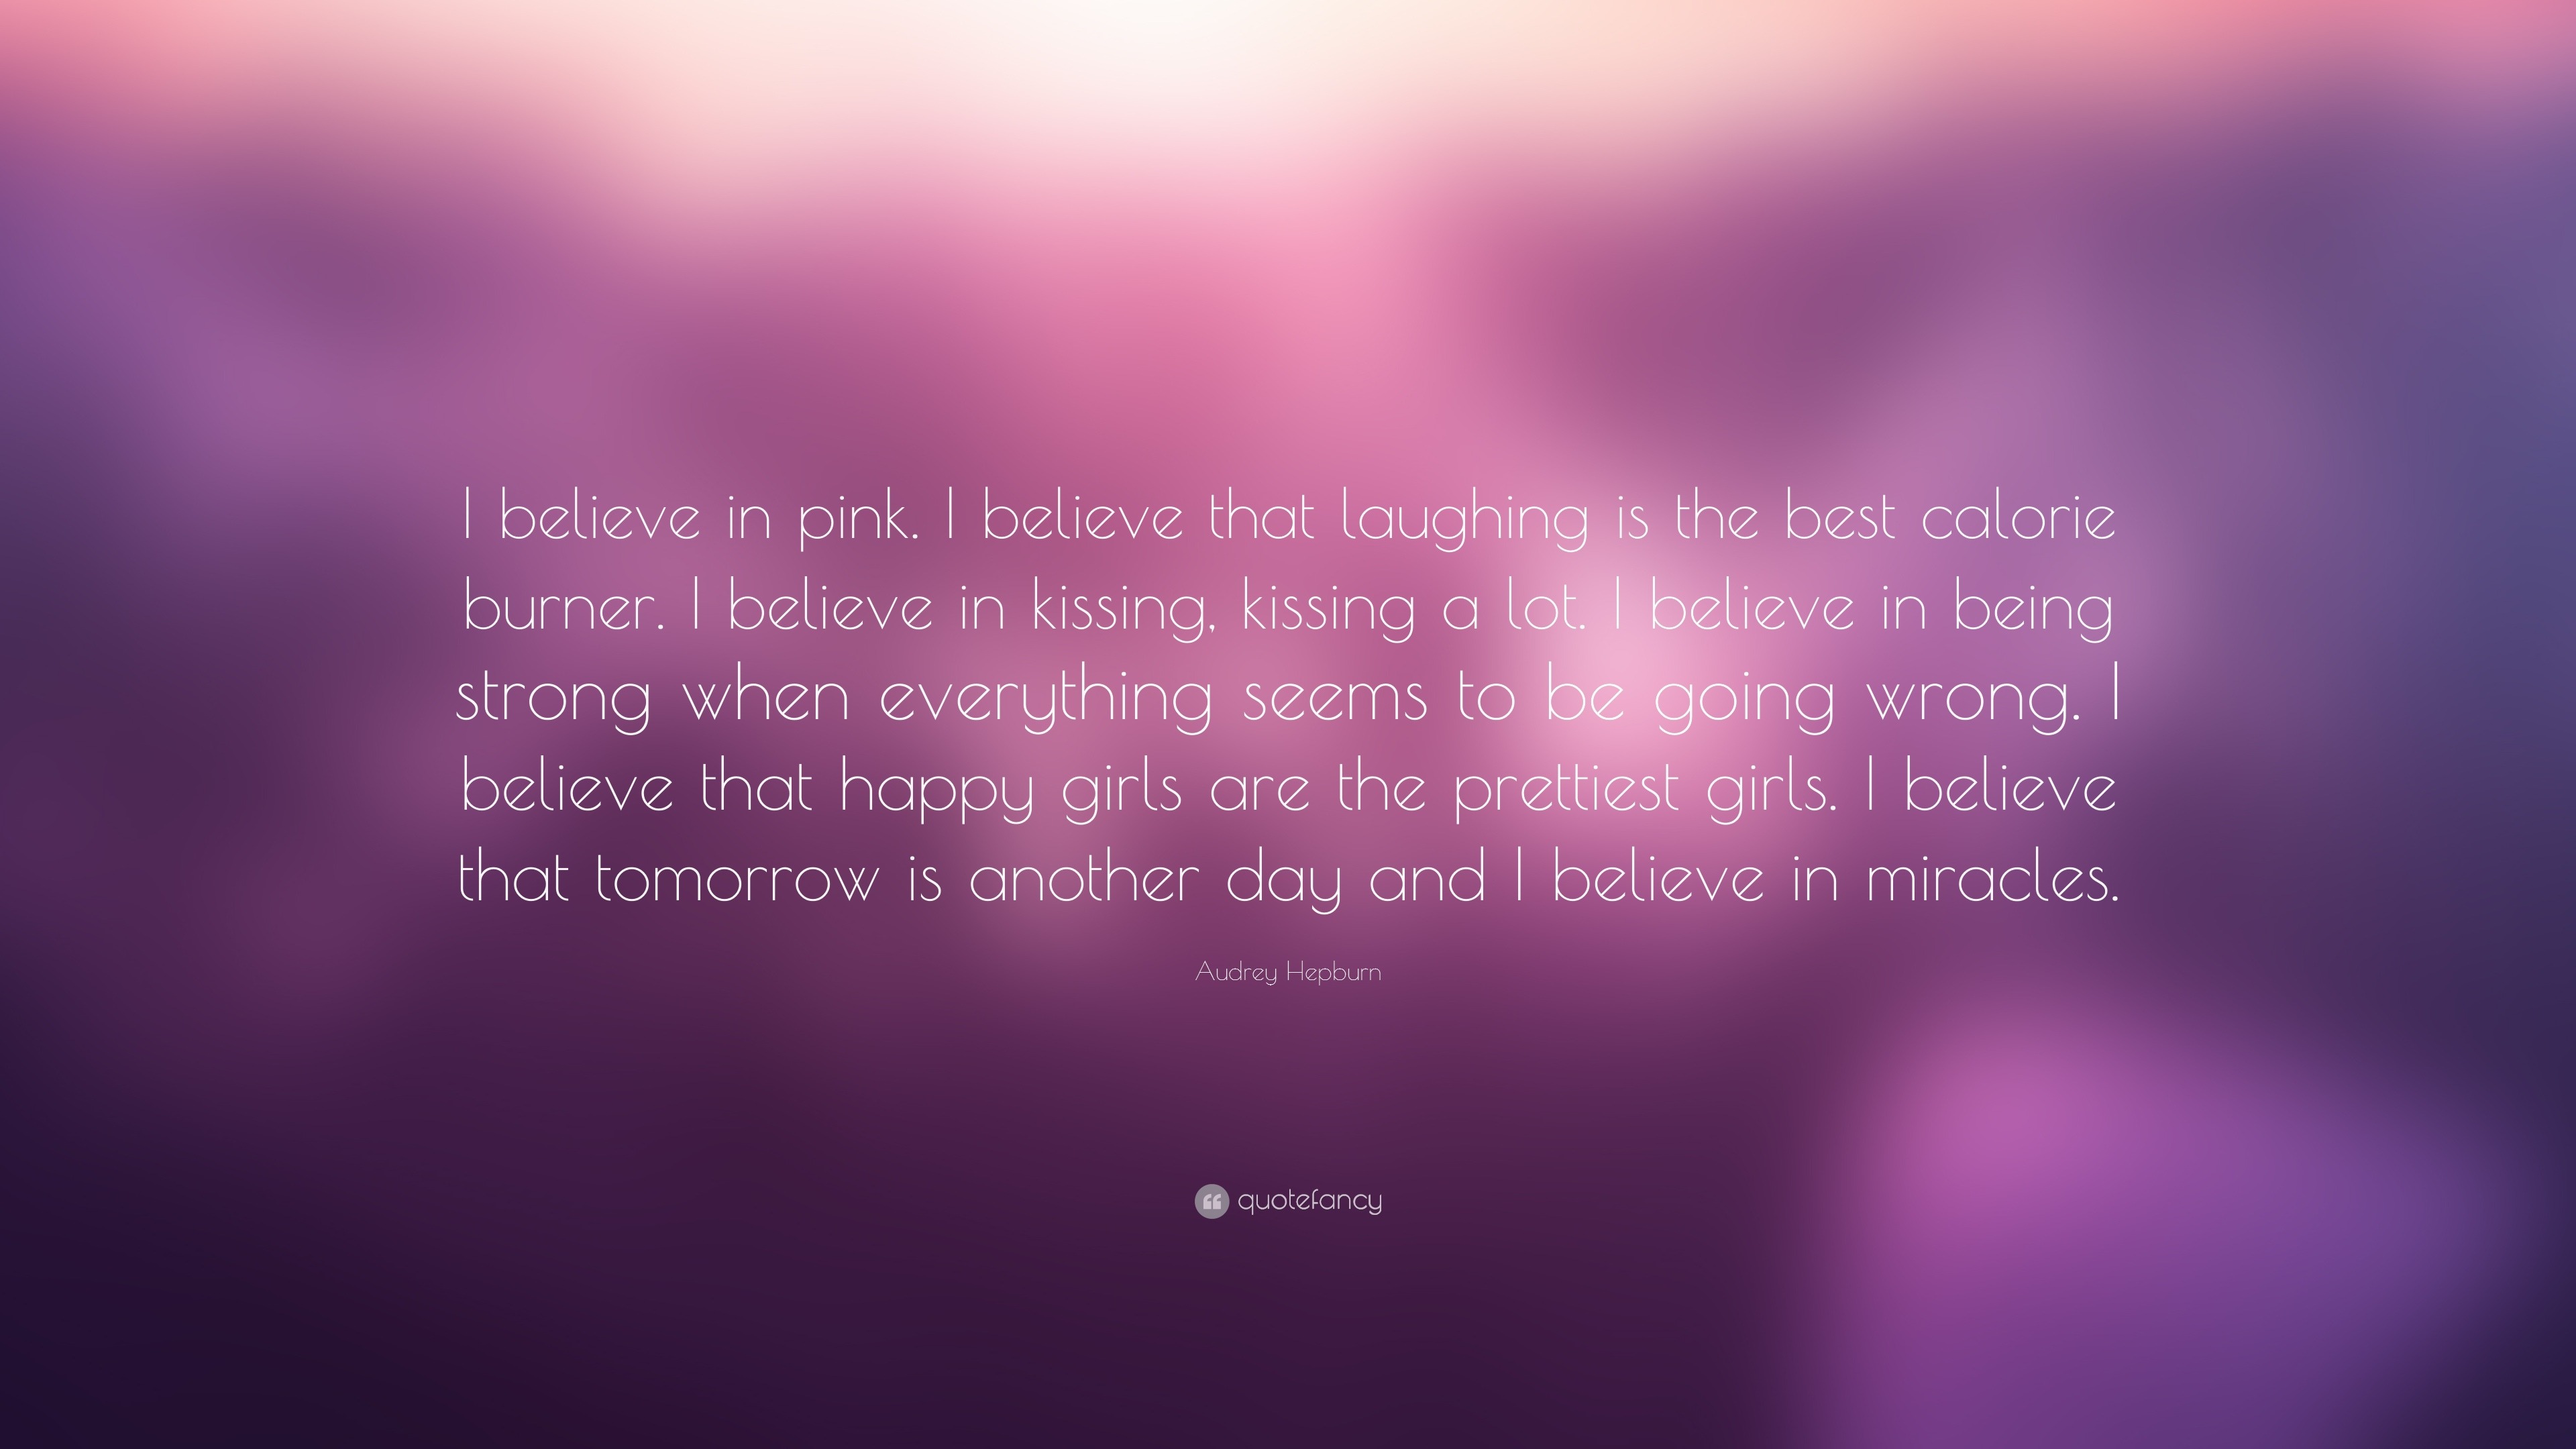 Audrey Hepburn Quote: "I believe in pink. I believe that laughing is the best calorie burner. I ...